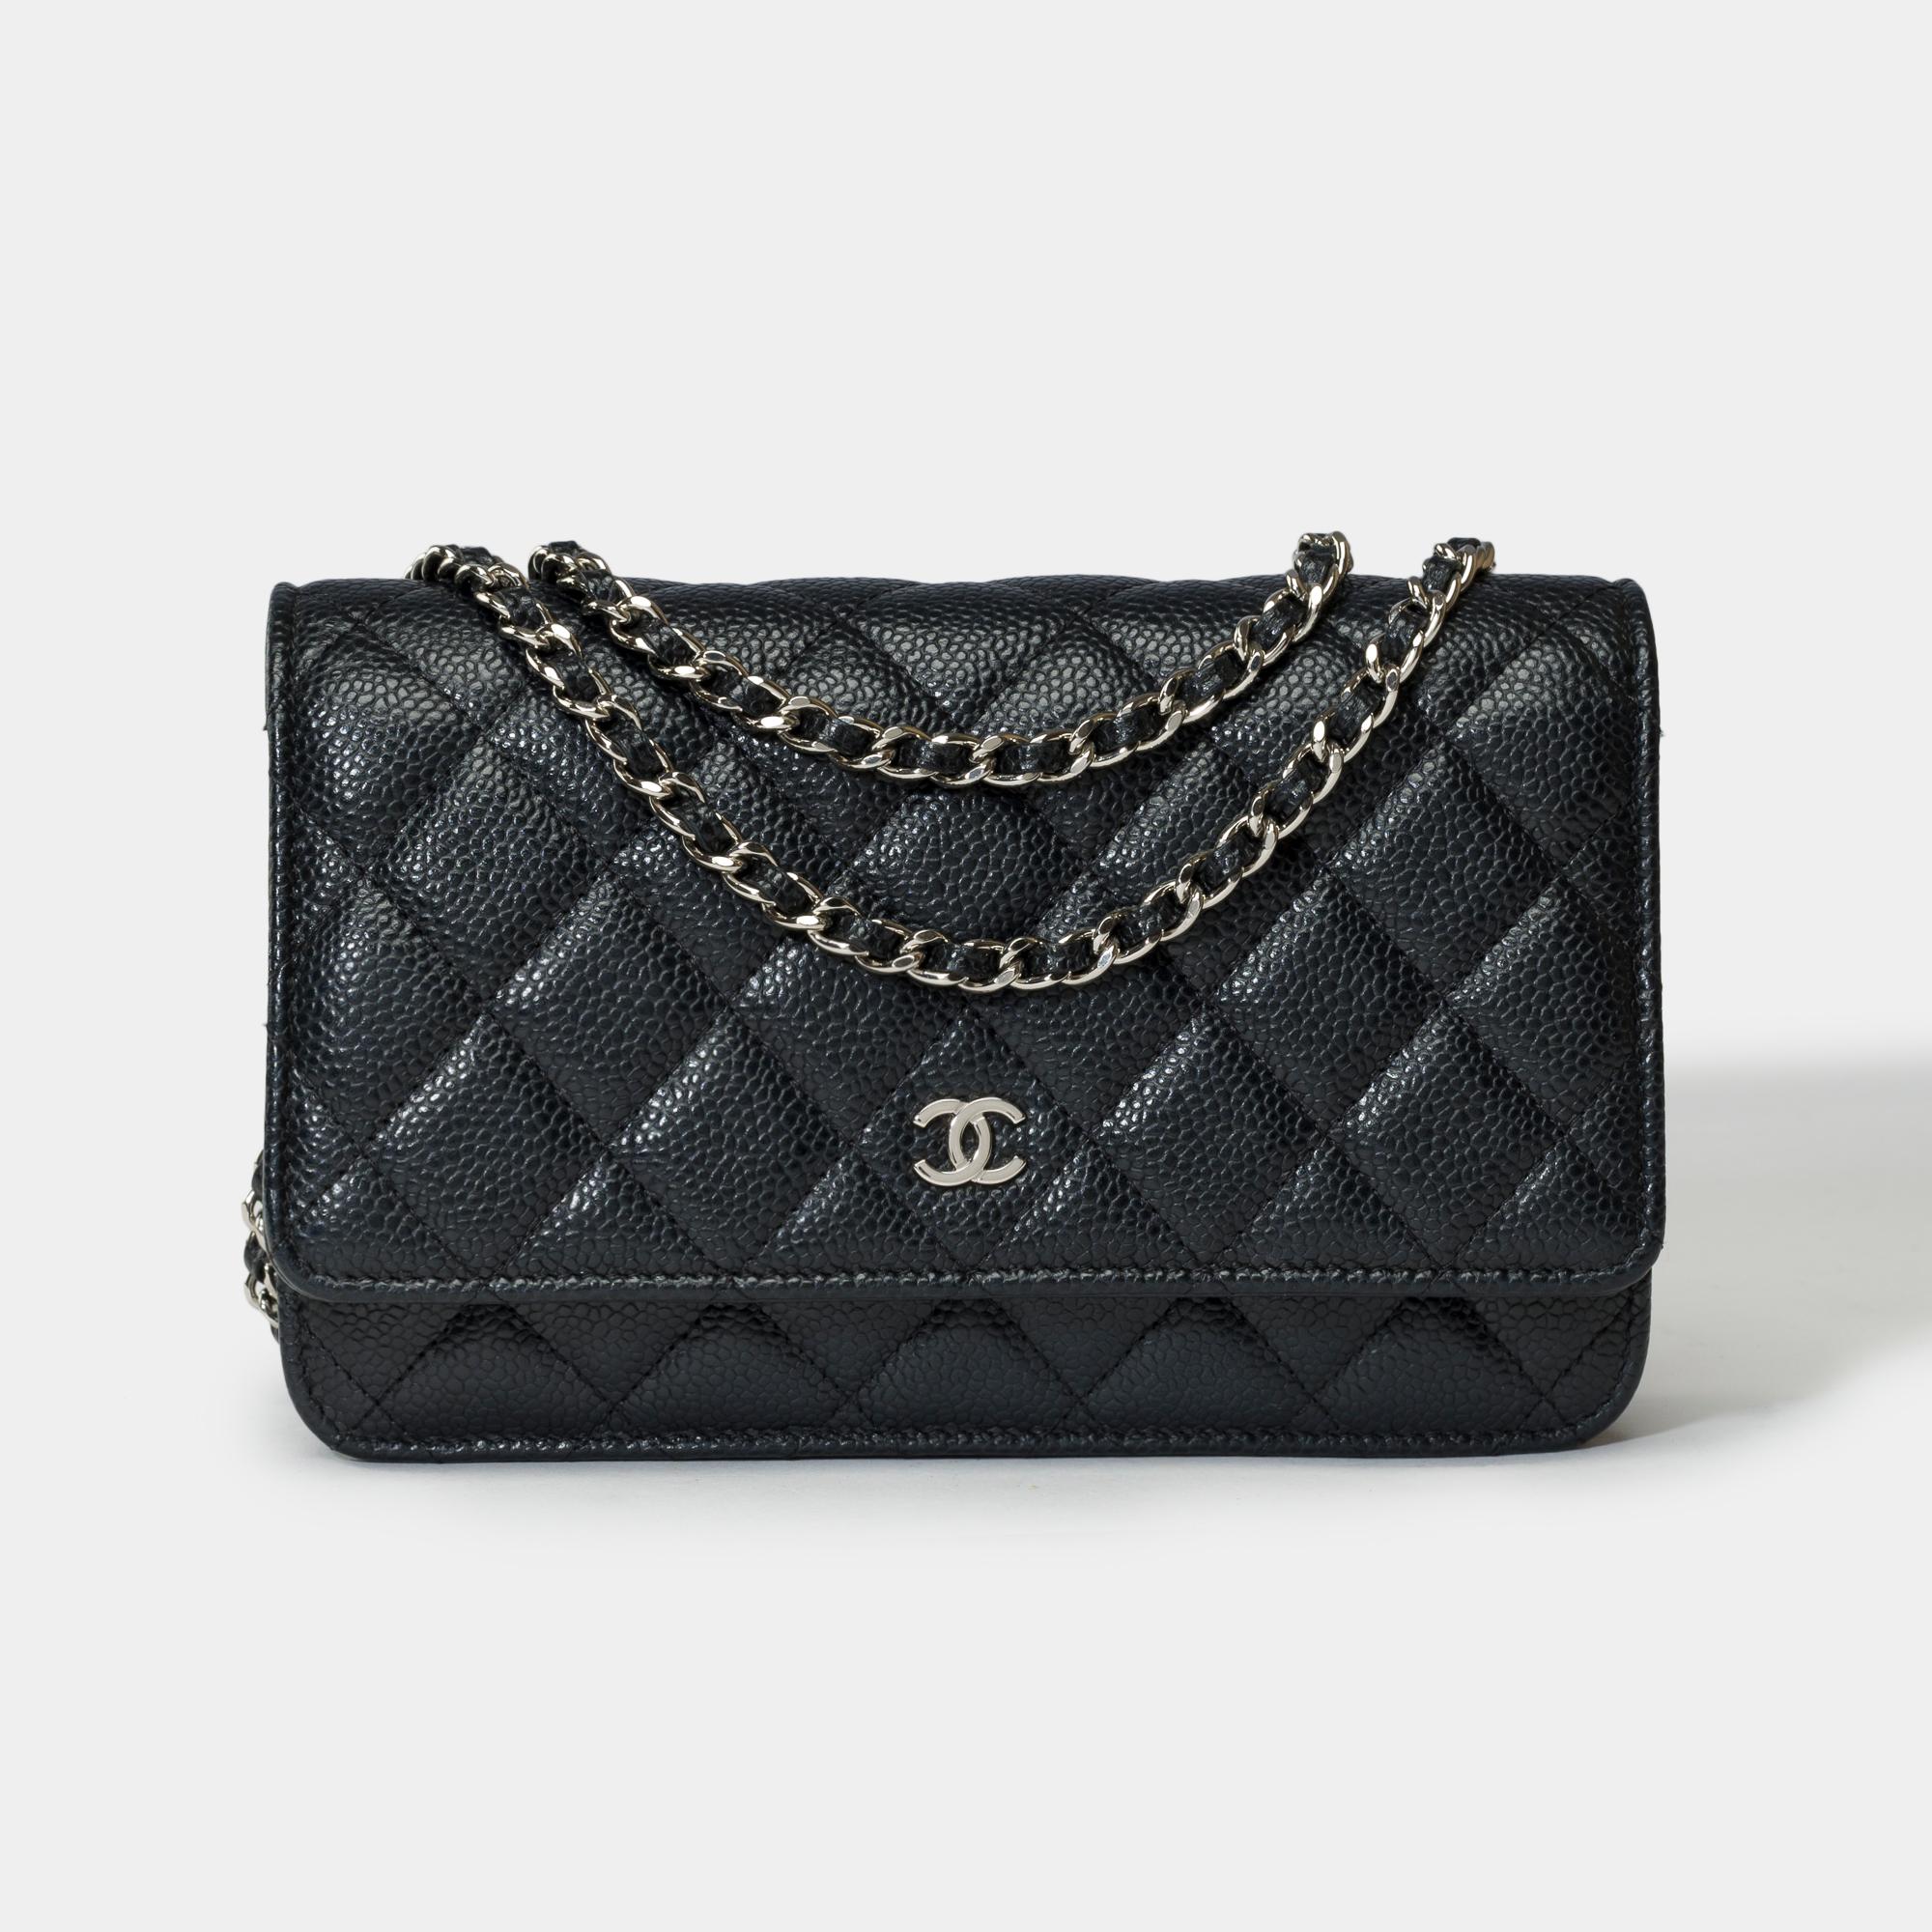 Gorgeous​​​ ​​​Chanel​​​ ​​​Wallet​​​ ​​​On​​​ ​​​Chain​​​ ​​​shoulder​​​ ​​​bag​​​ ​​​(WOC)​​​ ​​​in​​​ ​​​black​​​ ​​​quilted​​​ ​​​caviar​​ ​​leather,​​​ ​​​silver​​​ ​​​metal​​​ ​​​trim,​​​ ​​​a​​​ ​​​silver​​​ ​​​metal​​​ ​​​chain​​​